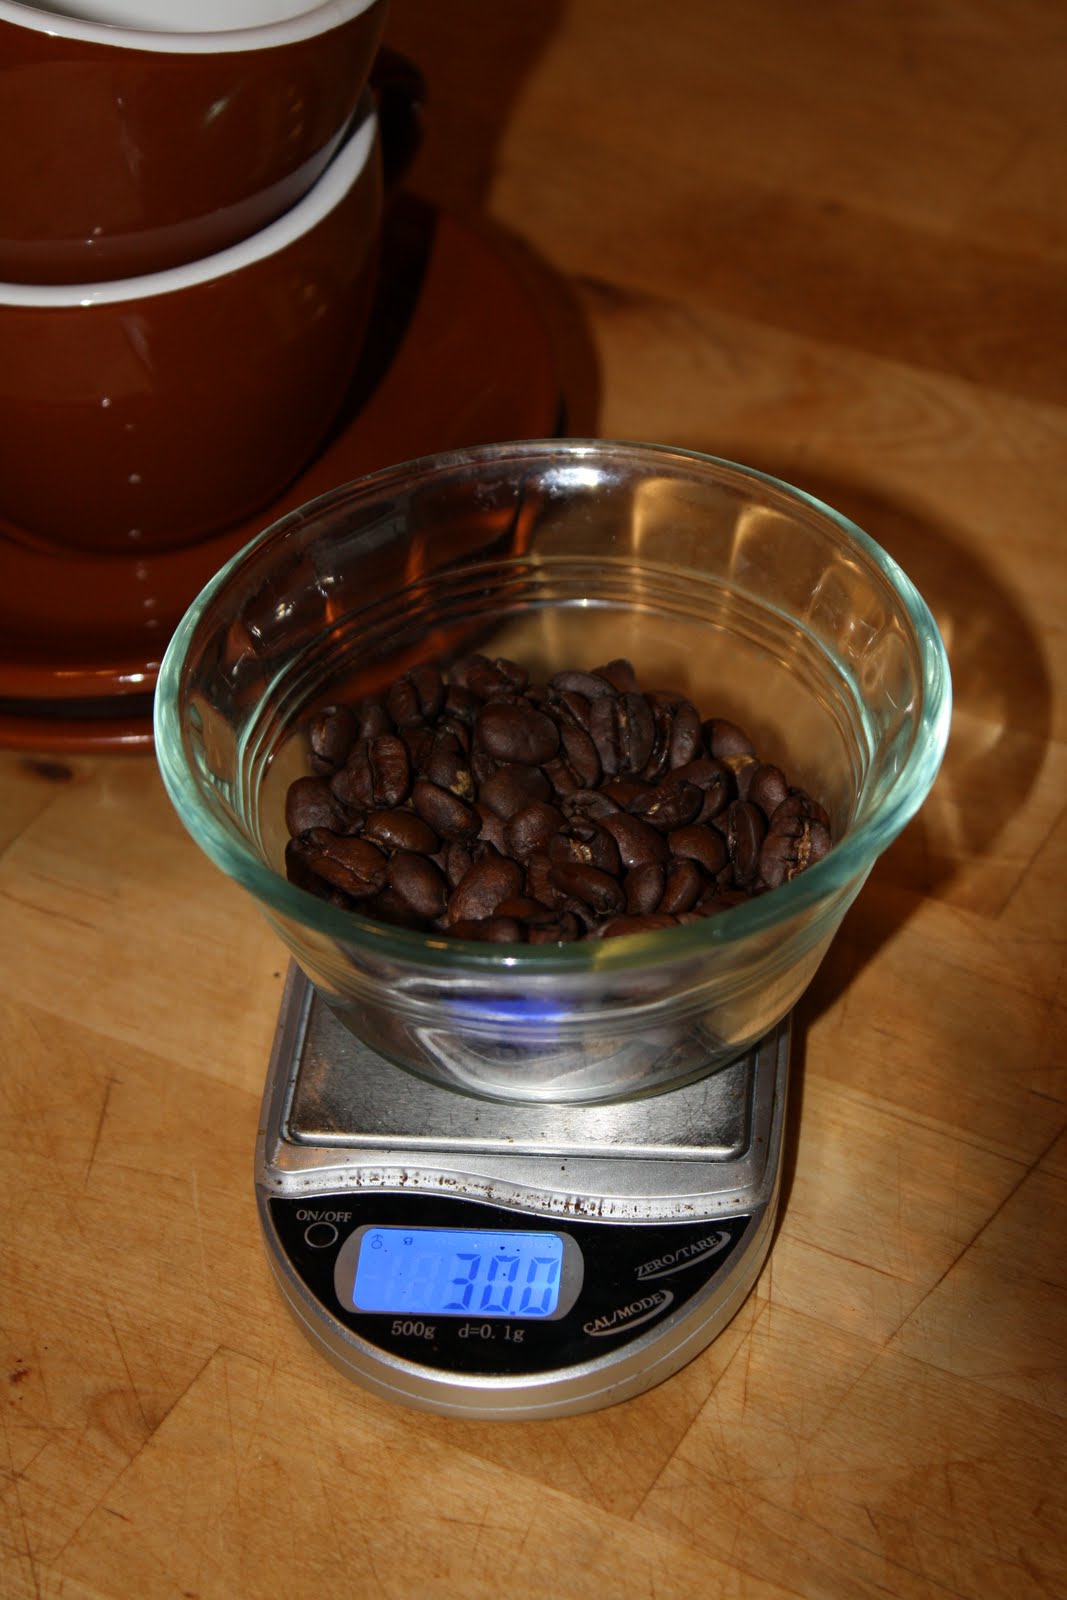 Weighing the coffee